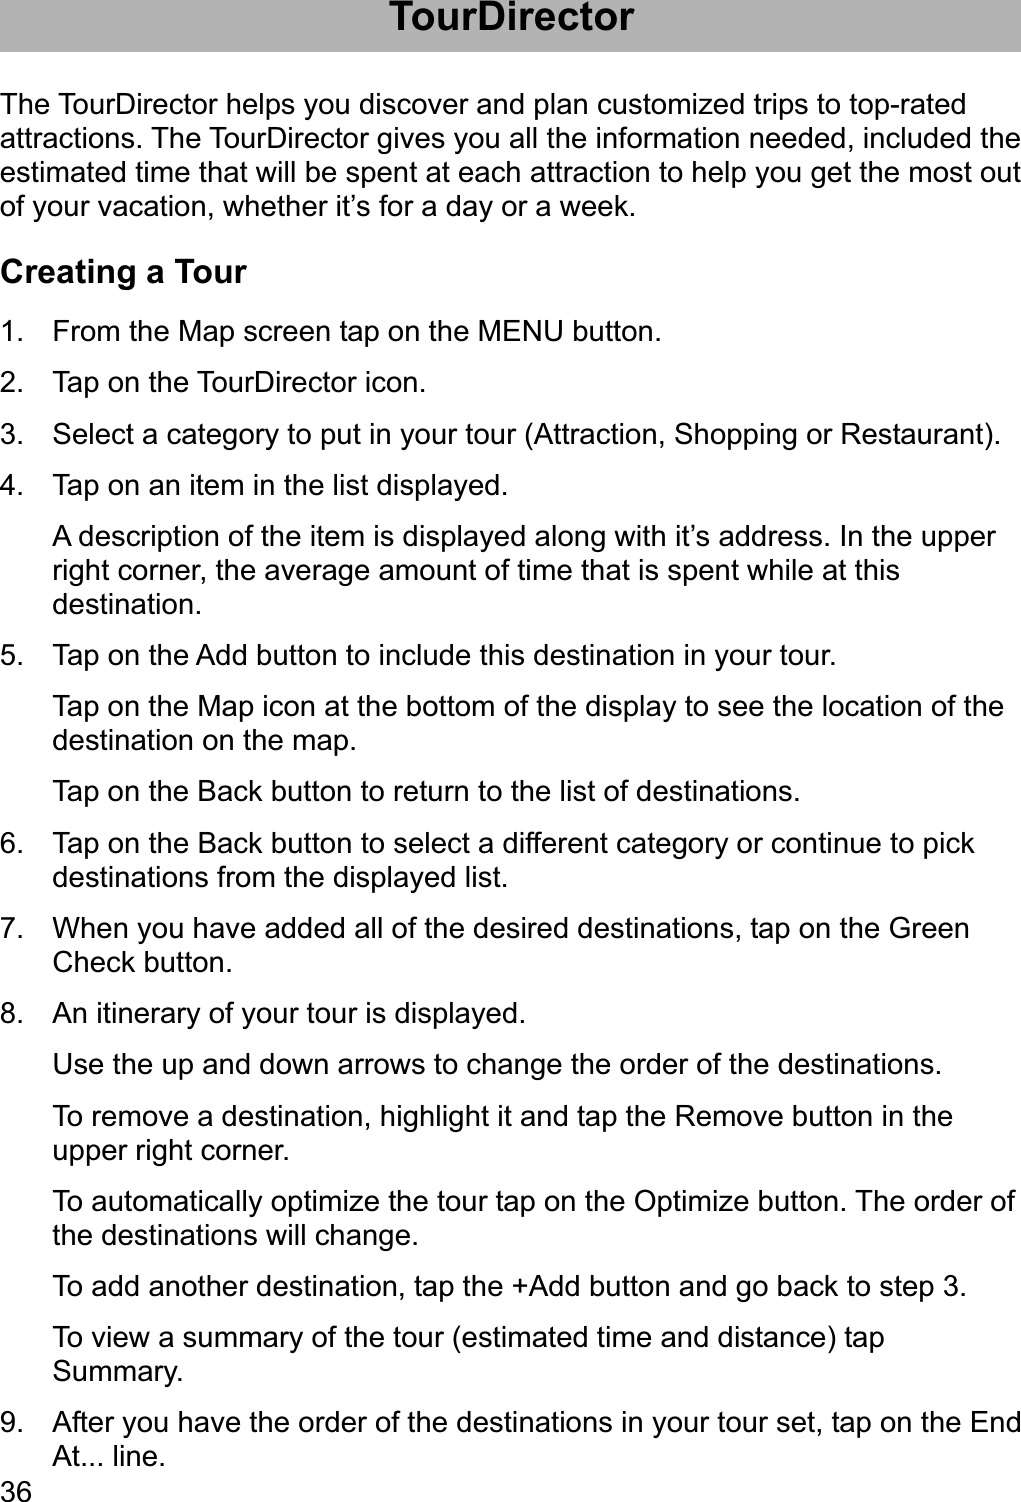 36TourDirector The TourDirector helps you discover and plan customized trips to top-rated attractions. The TourDirector gives you all the information needed, included the estimated time that will be spent at each attraction to help you get the most out of your vacation, whether it’s for a day or a week. Creating a Tour 1.  From the Map screen tap on the MENU button. 2.  Tap on the TourDirector icon. 3.  Select a category to put in your tour (Attraction, Shopping or Restaurant). 4.  Tap on an item in the list displayed. A description of the item is displayed along with it’s address. In the upper right corner, the average amount of time that is spent while at this destination.5.  Tap on the Add button to include this destination in your tour. Tap on the Map icon at the bottom of the display to see the location of the destination on the map. Tap on the Back button to return to the list of destinations. 6.  Tap on the Back button to select a different category or continue to pick destinations from the displayed list. 7.  When you have added all of the desired destinations, tap on the Green Check button. 8.  An itinerary of your tour is displayed. Use the up and down arrows to change the order of the destinations. To remove a destination, highlight it and tap the Remove button in the upper right corner. To automatically optimize the tour tap on the Optimize button. The order of the destinations will change. To add another destination, tap the +Add button and go back to step 3. To view a summary of the tour (estimated time and distance) tap Summary. 9.  After you have the order of the destinations in your tour set, tap on the End At... line. 